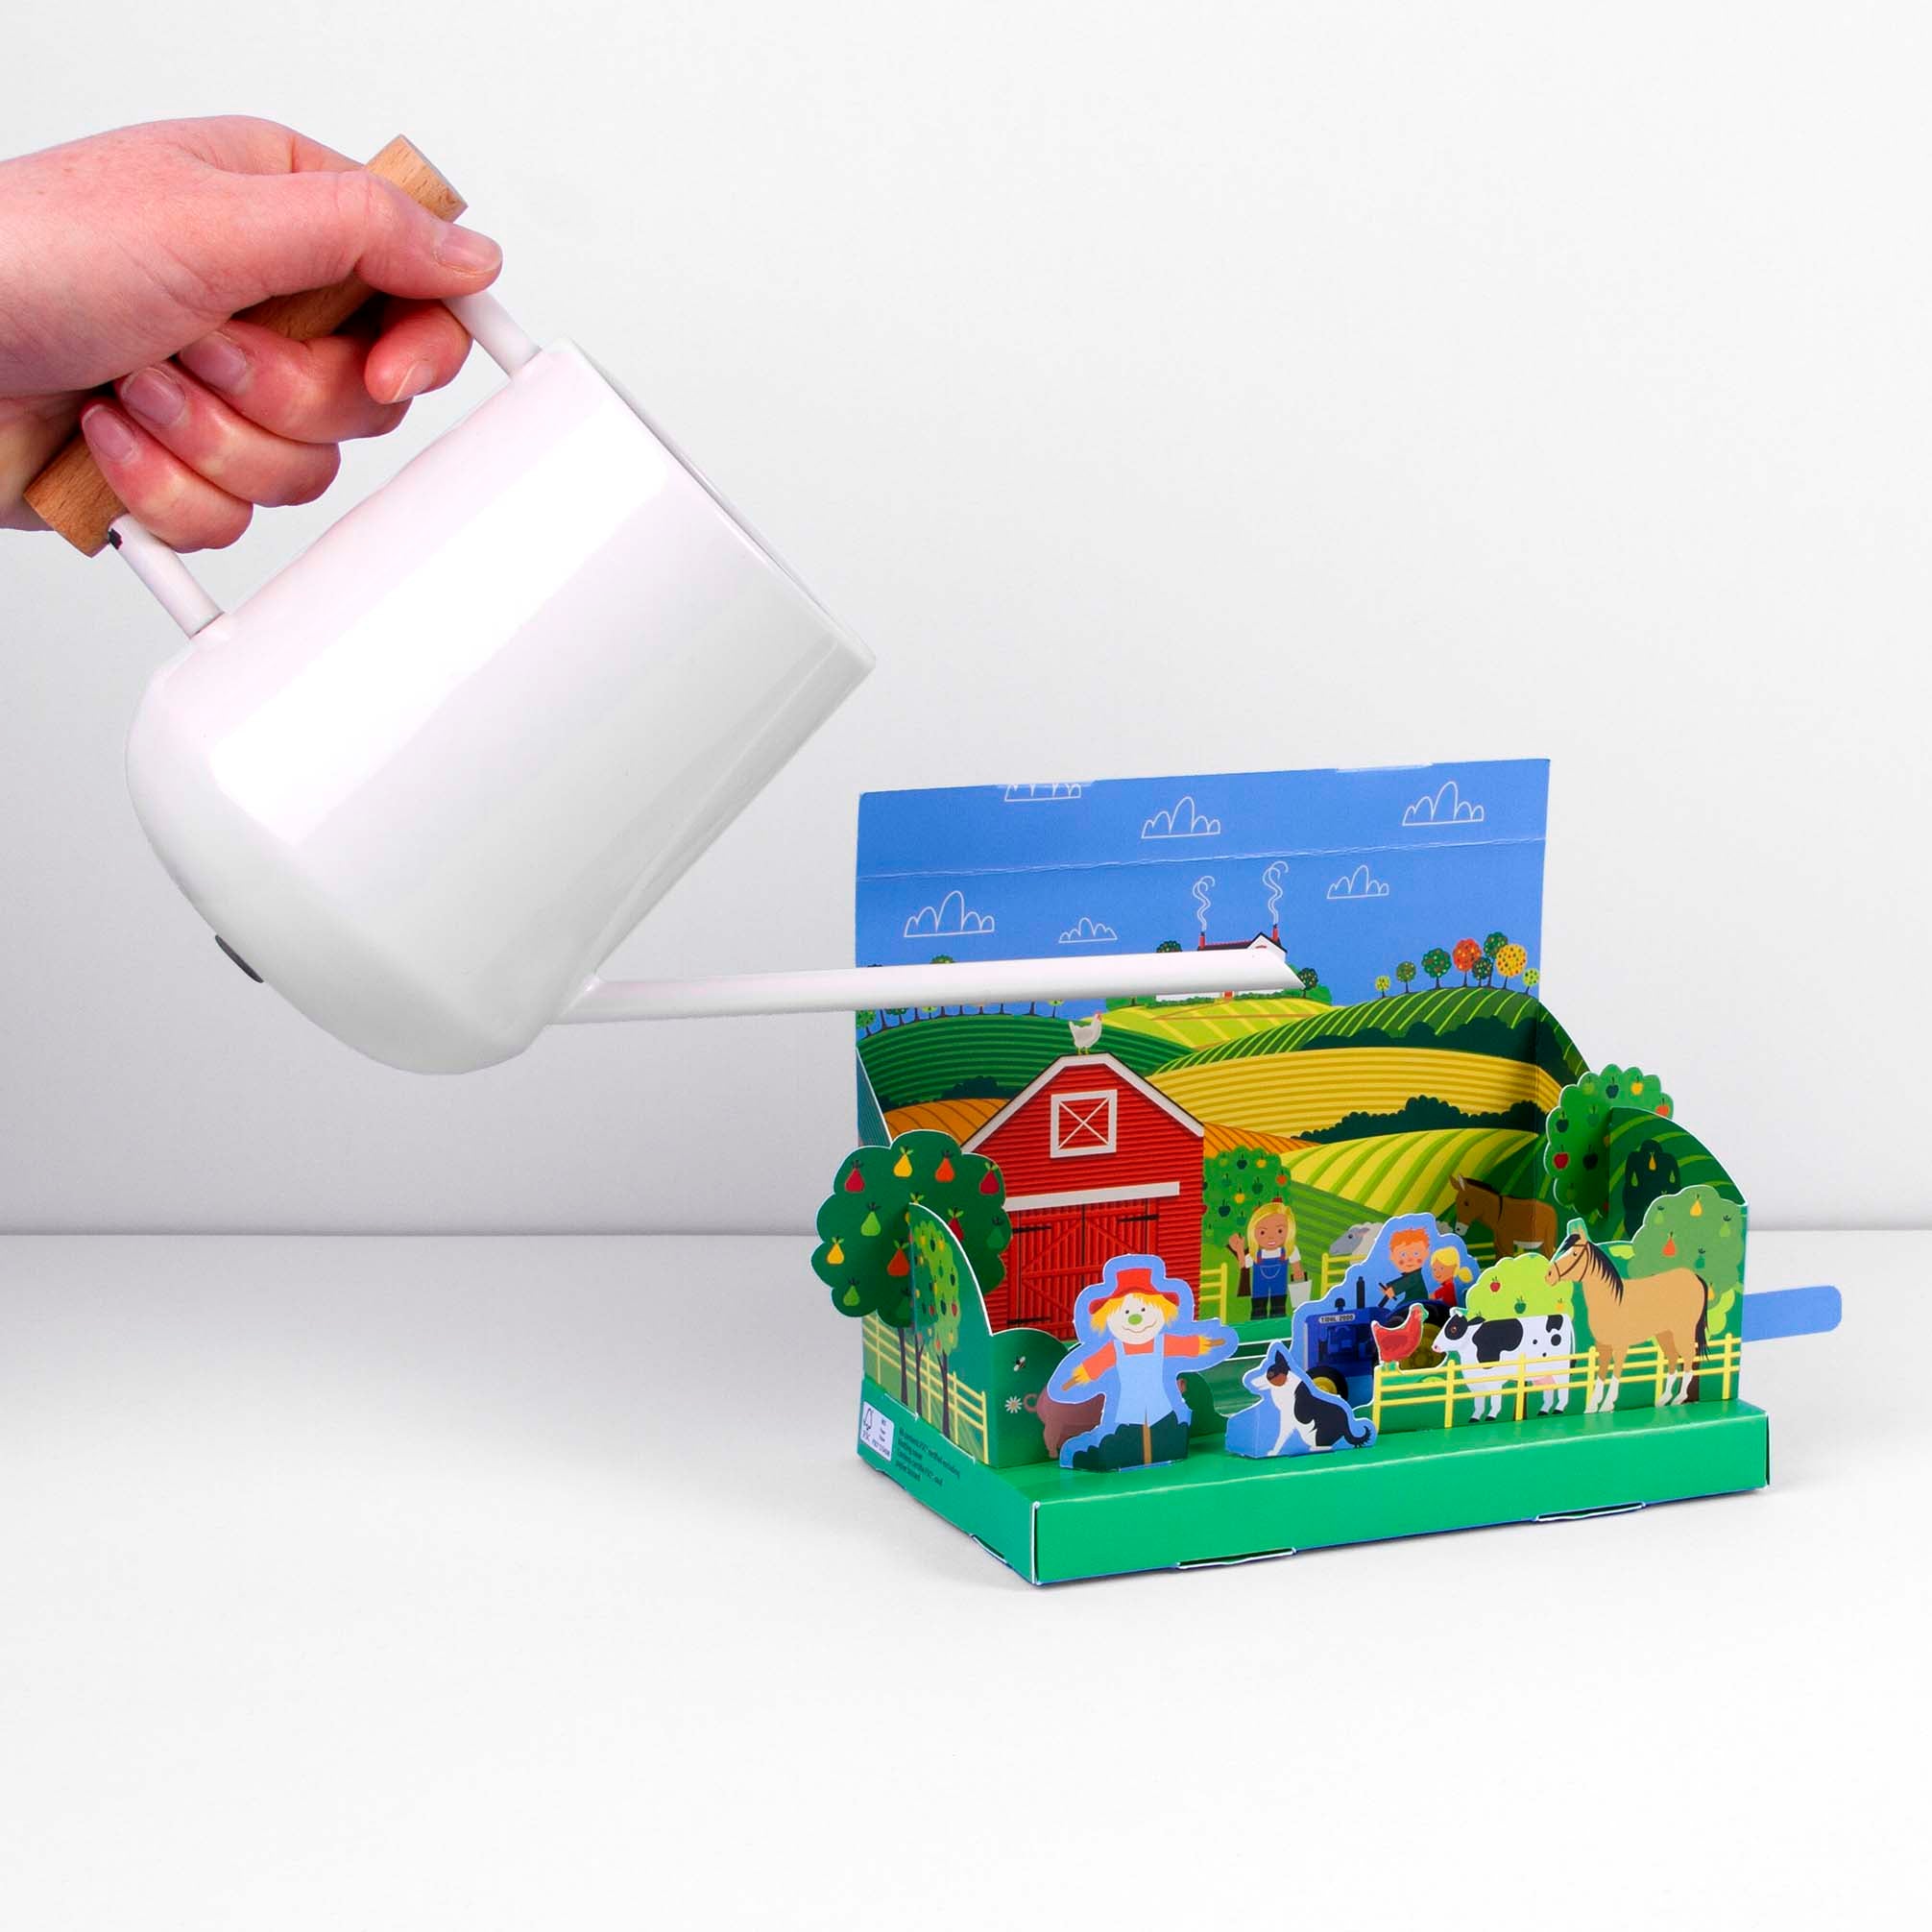 A hand holding a white watering can is shown watering the children's mini farmyard garden